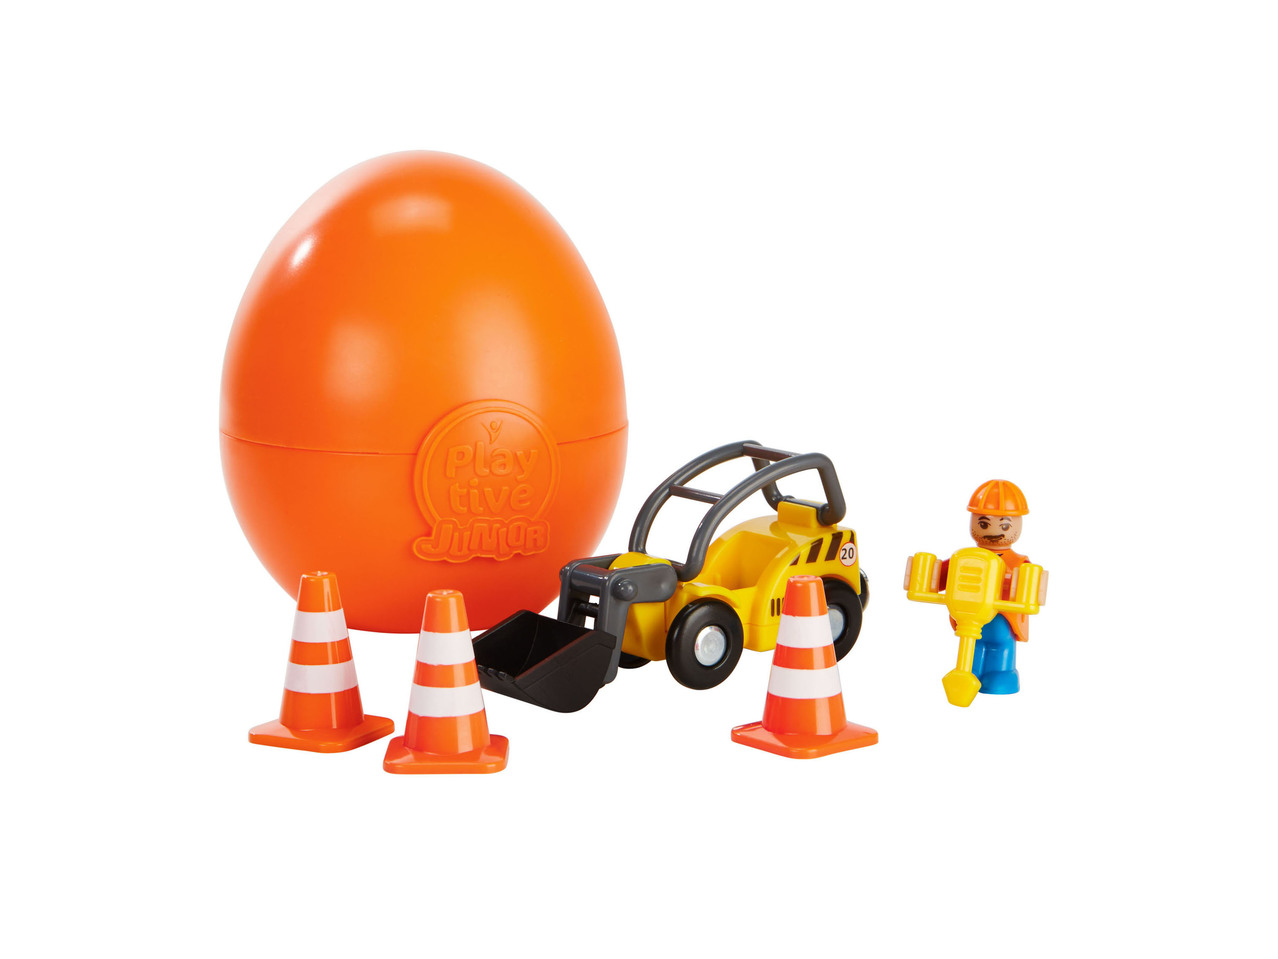 Egg with Toy Set